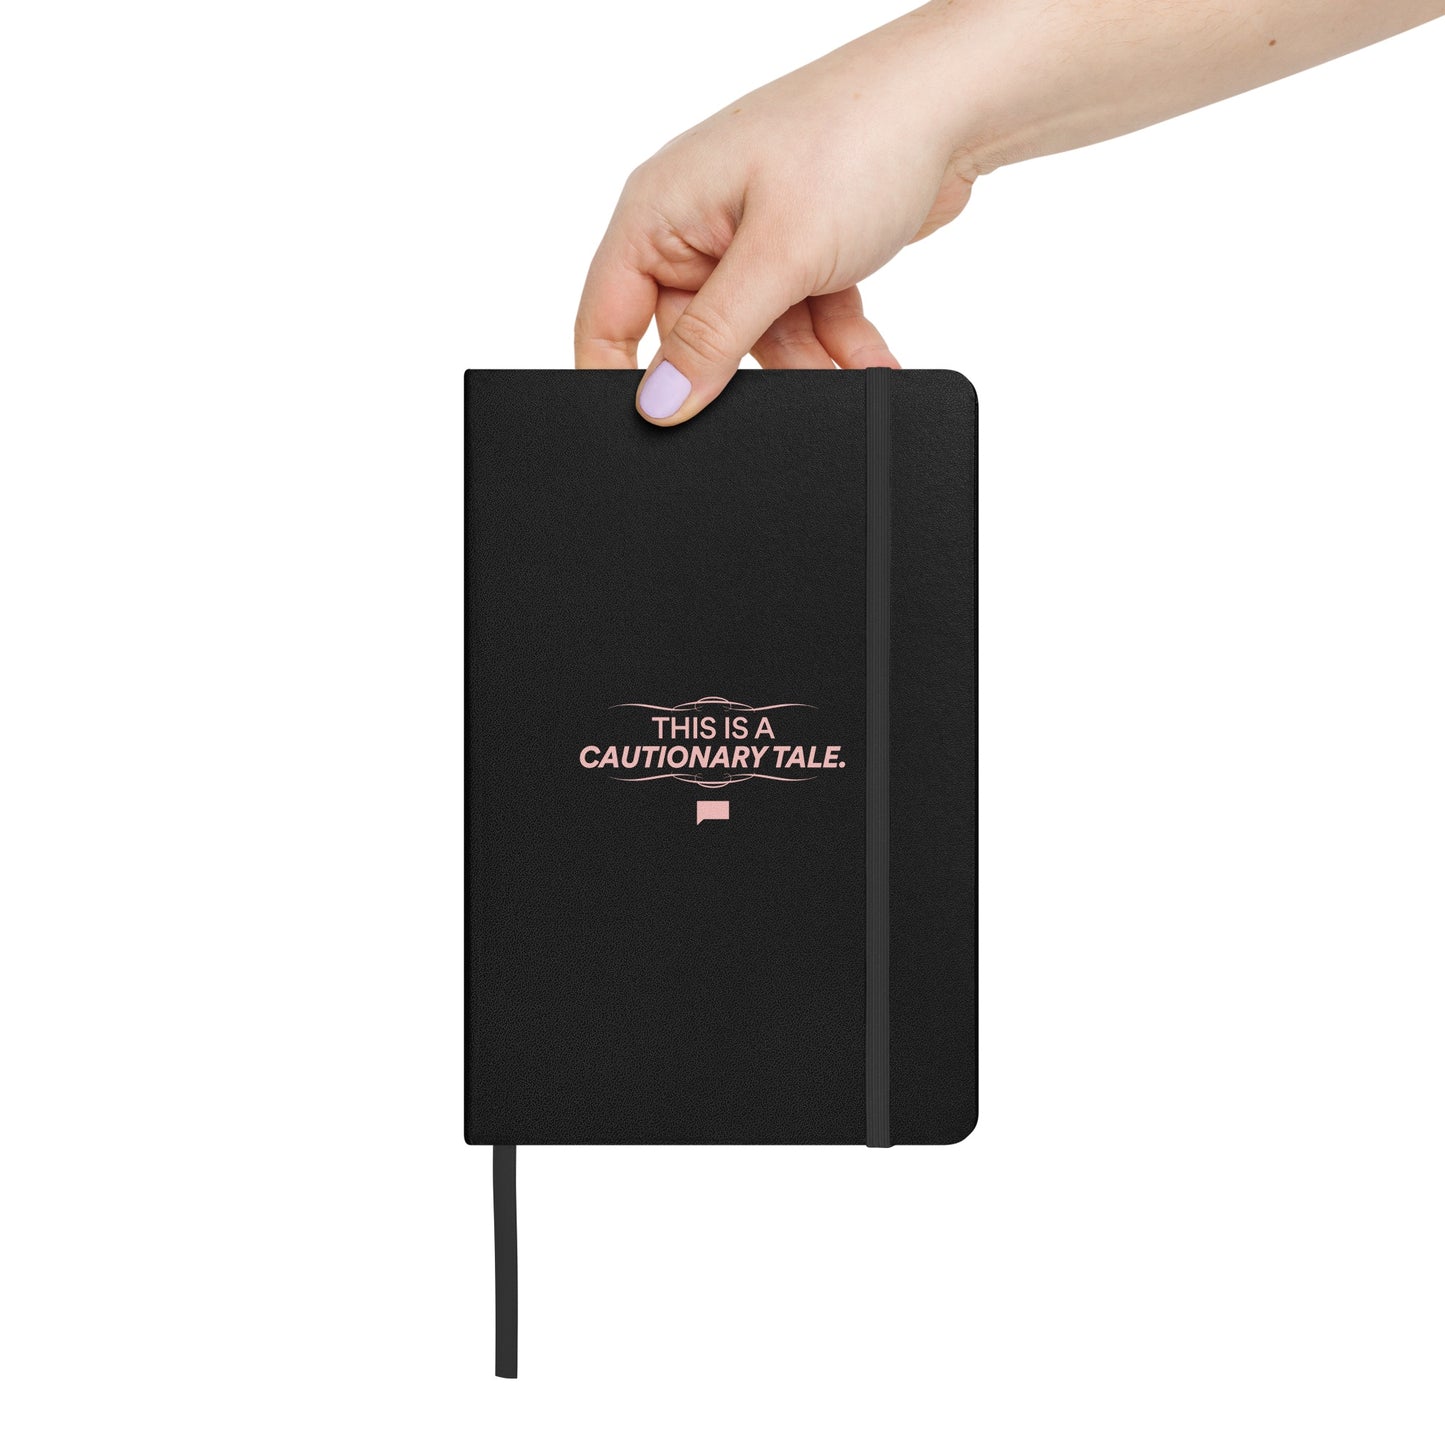 Southern Charm This is a Cautionary Tale Notebook